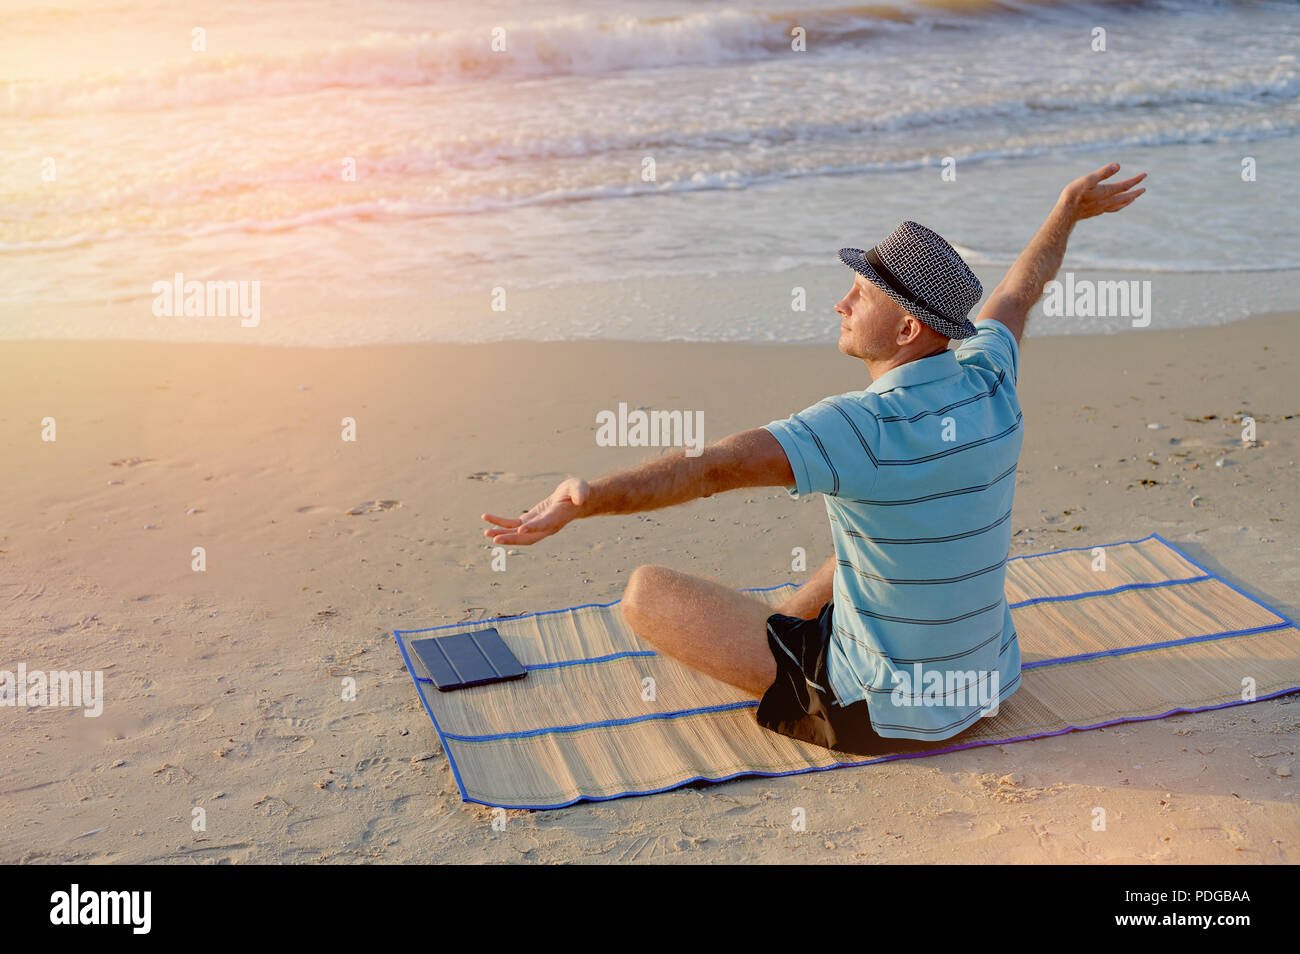 Summer lifestyle portrait male joy on the beach at the seashore life style morning at the sunrise, concept in travel Stock Photo